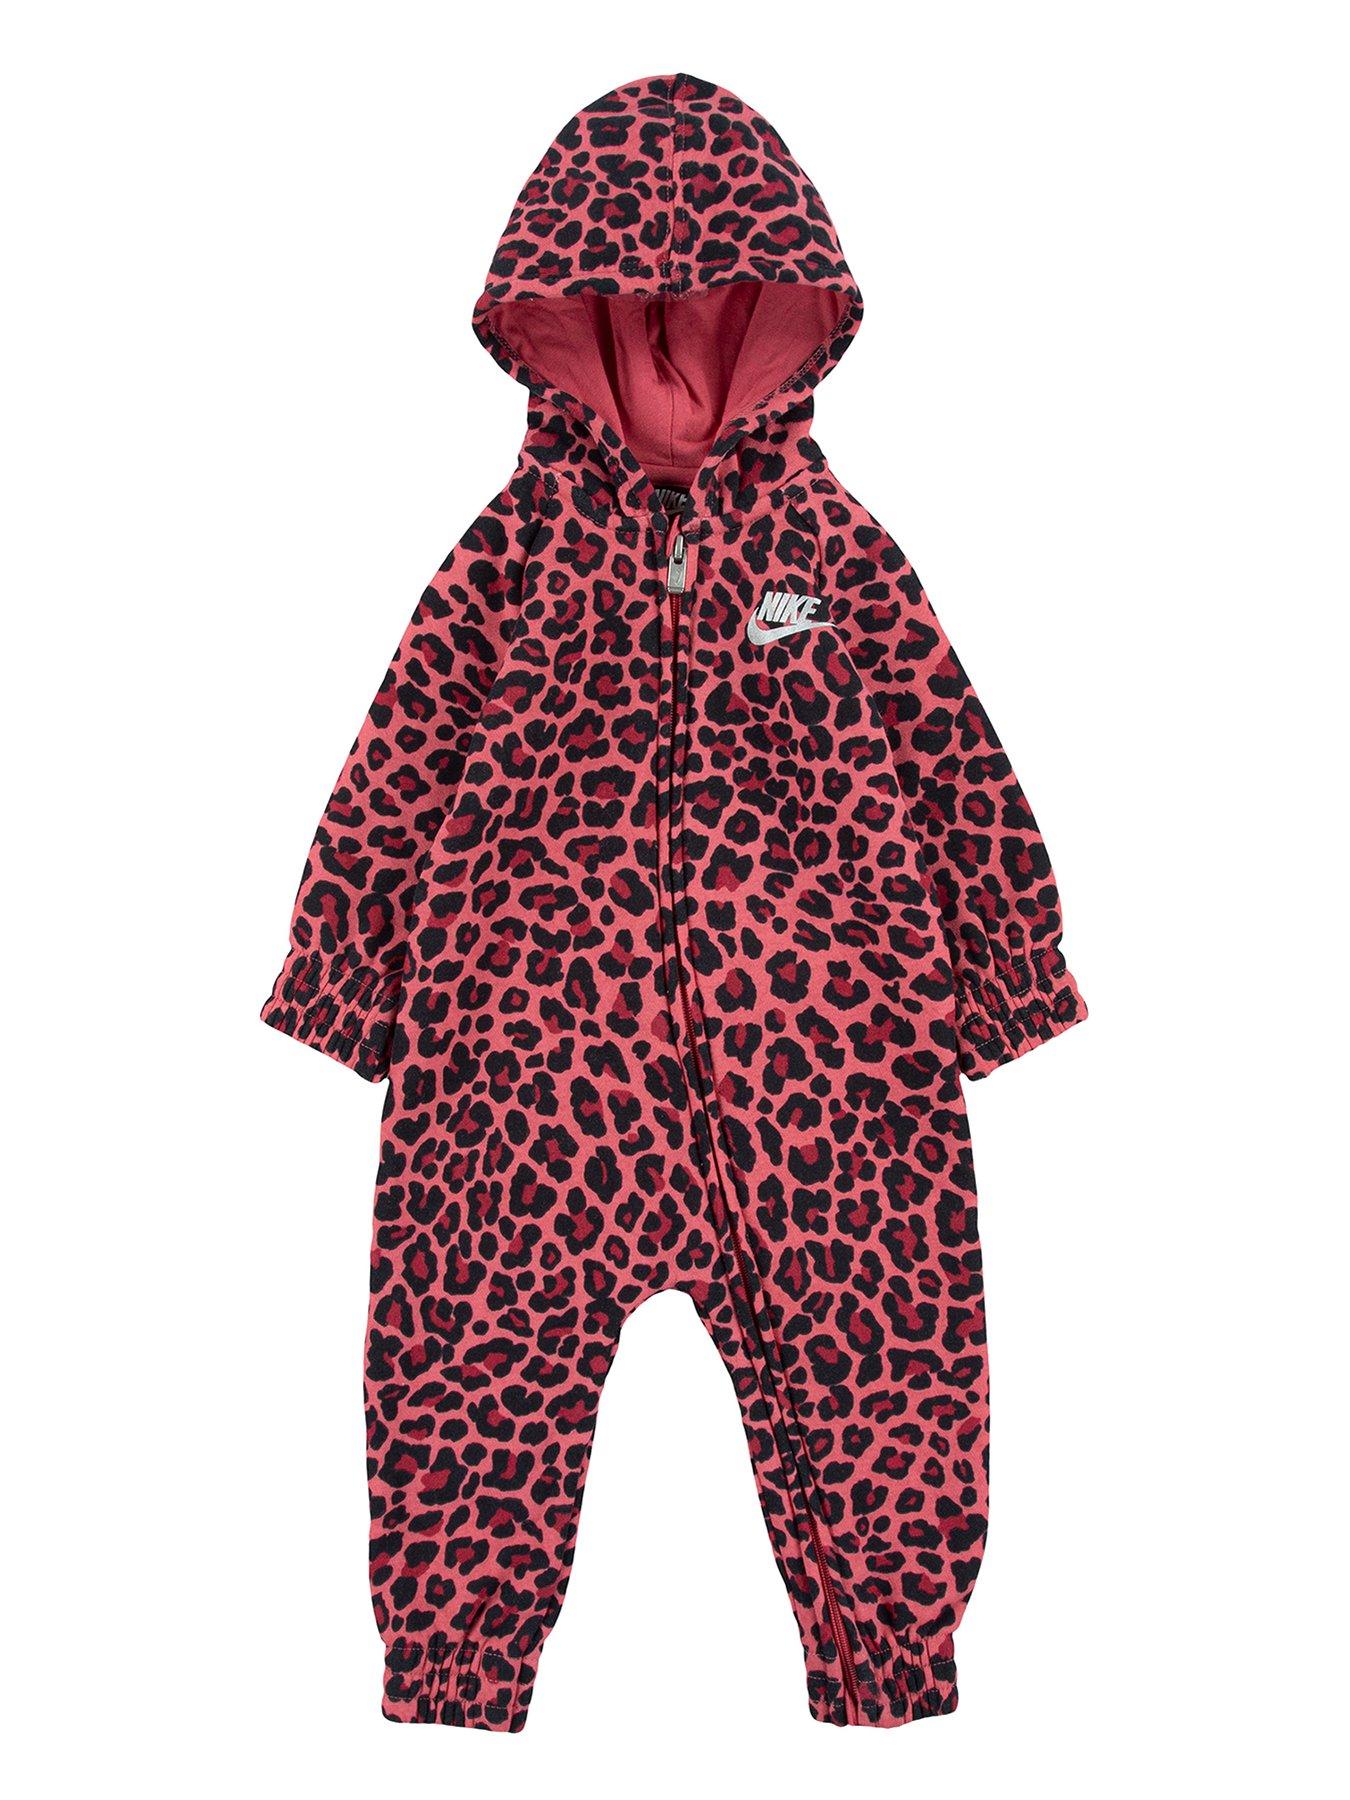  Baby Hooded Overall - Burgundy/Leopard Print